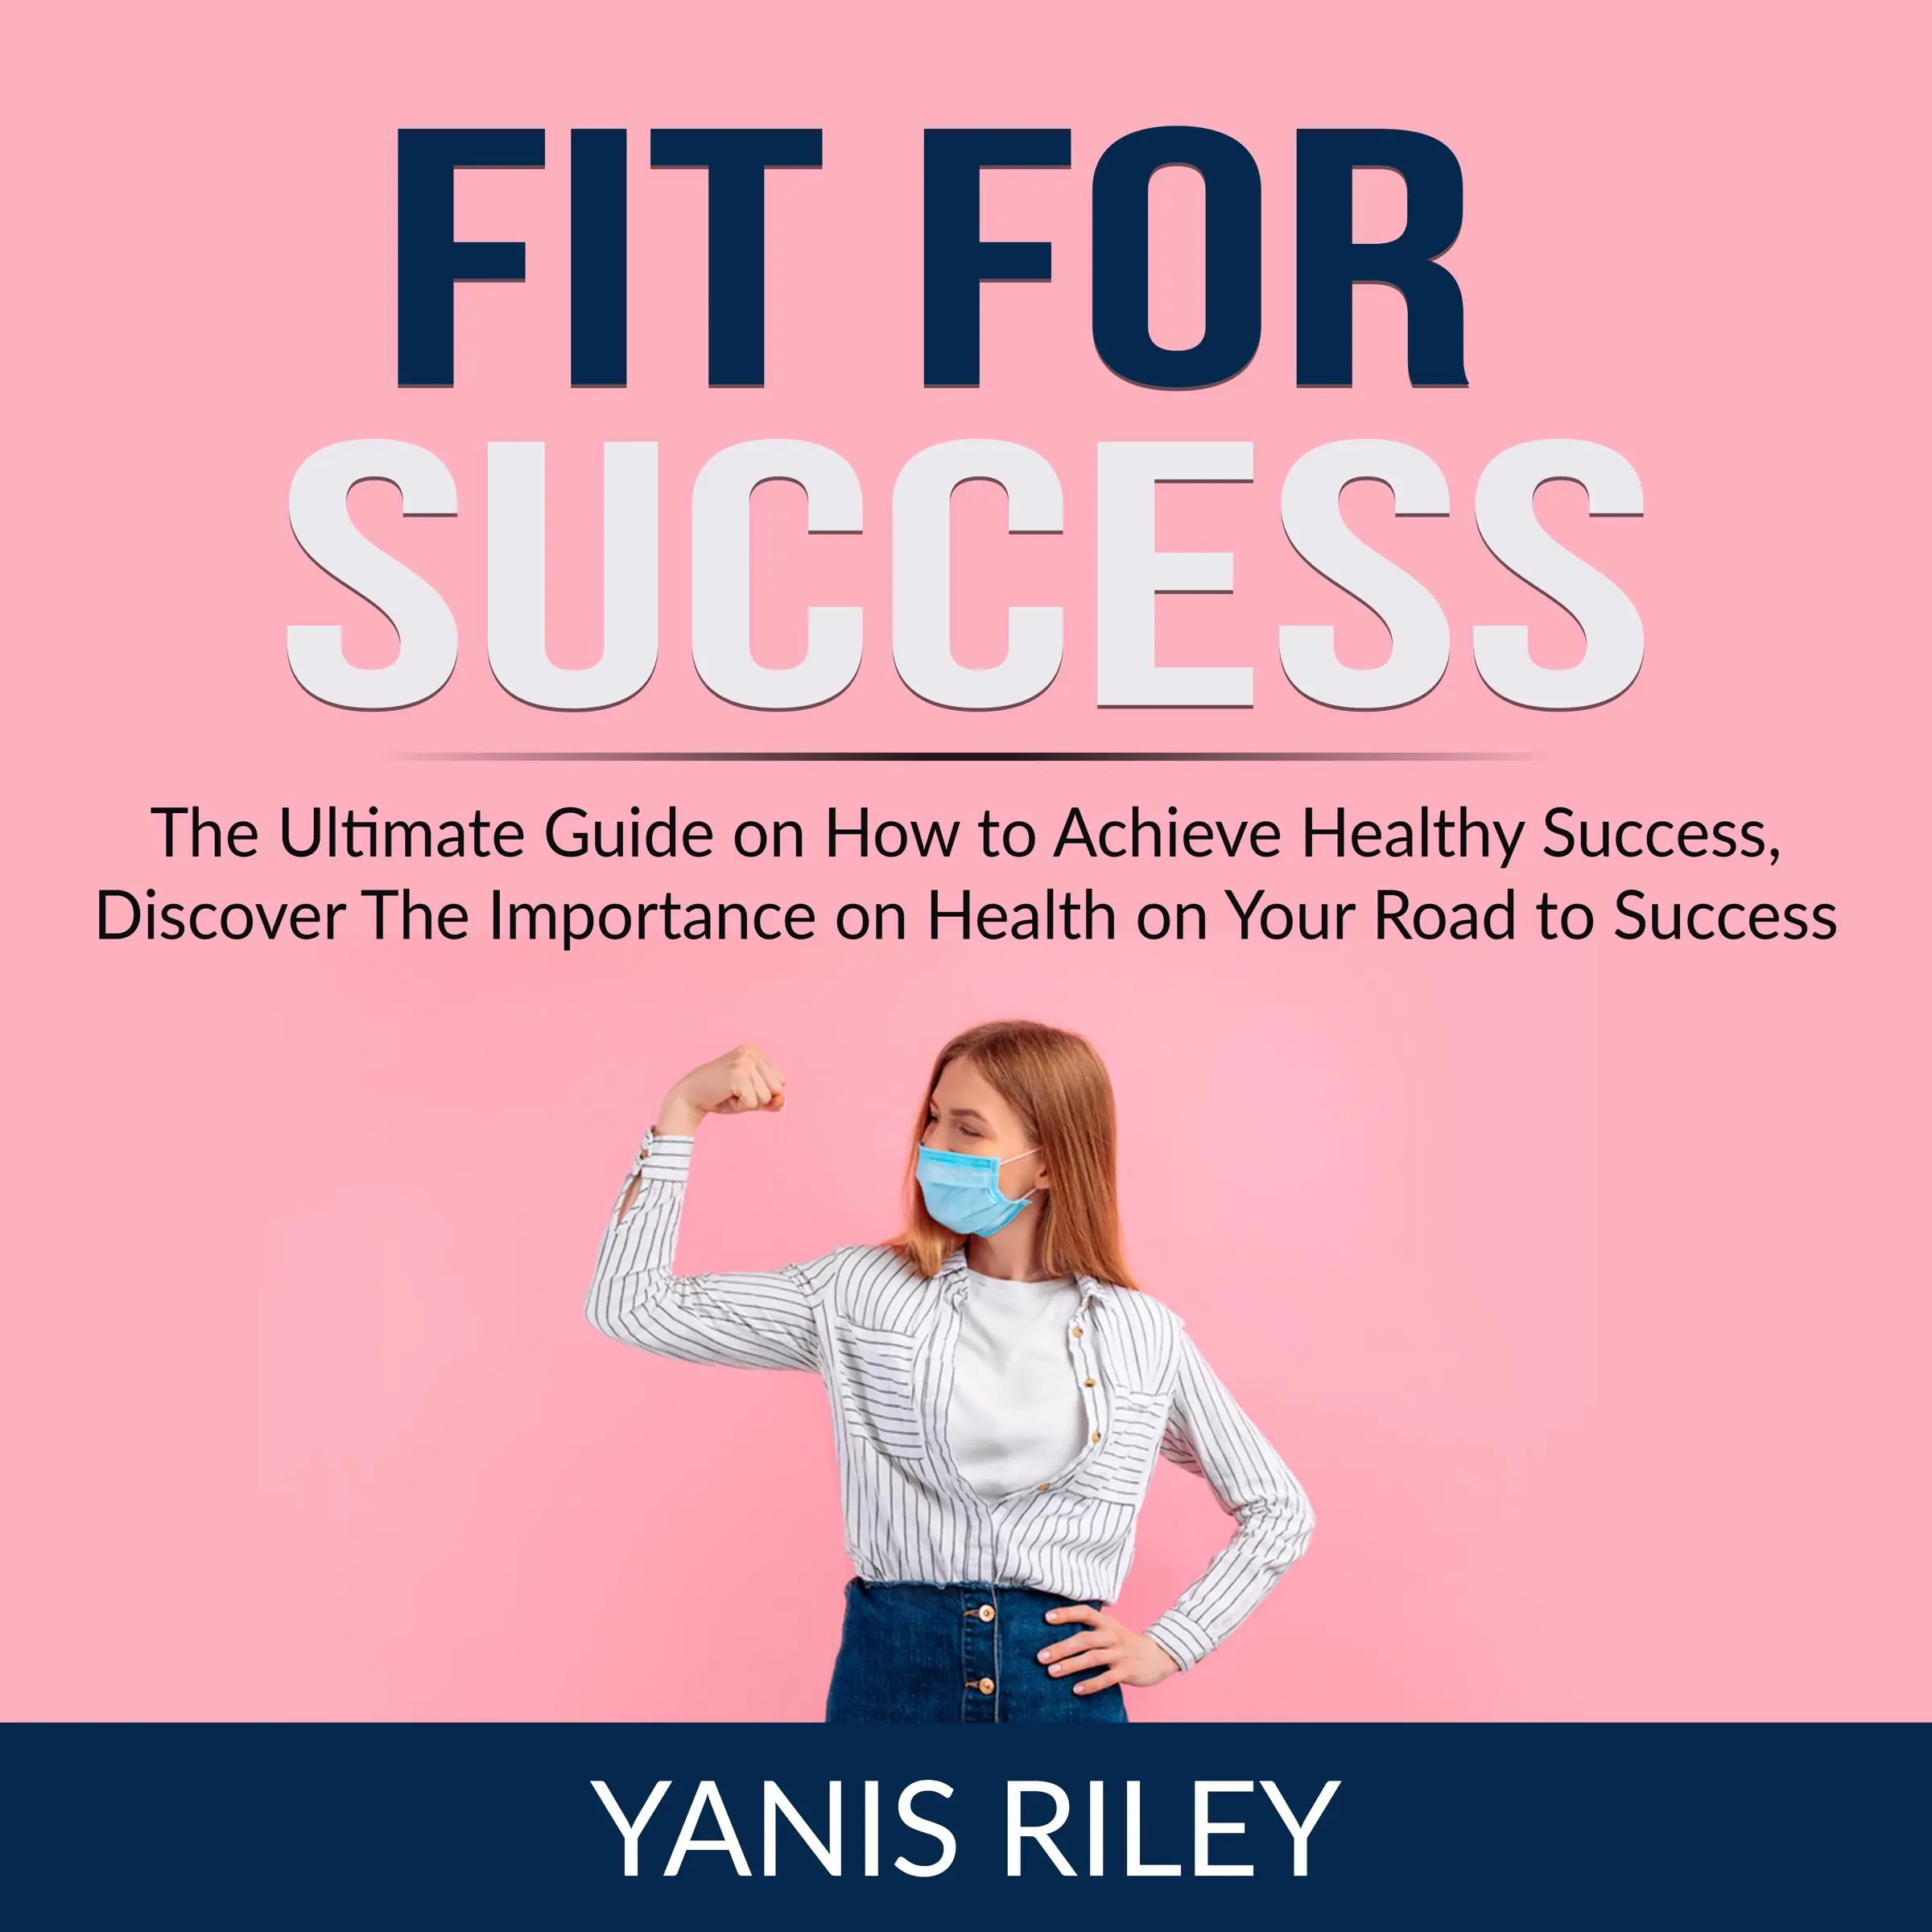 Fit For Success: The Ultimate Guide on How to Achieve Healthy Success, Discover The Importance on Health on Your Road to Success Audiobook by Yanis Riley